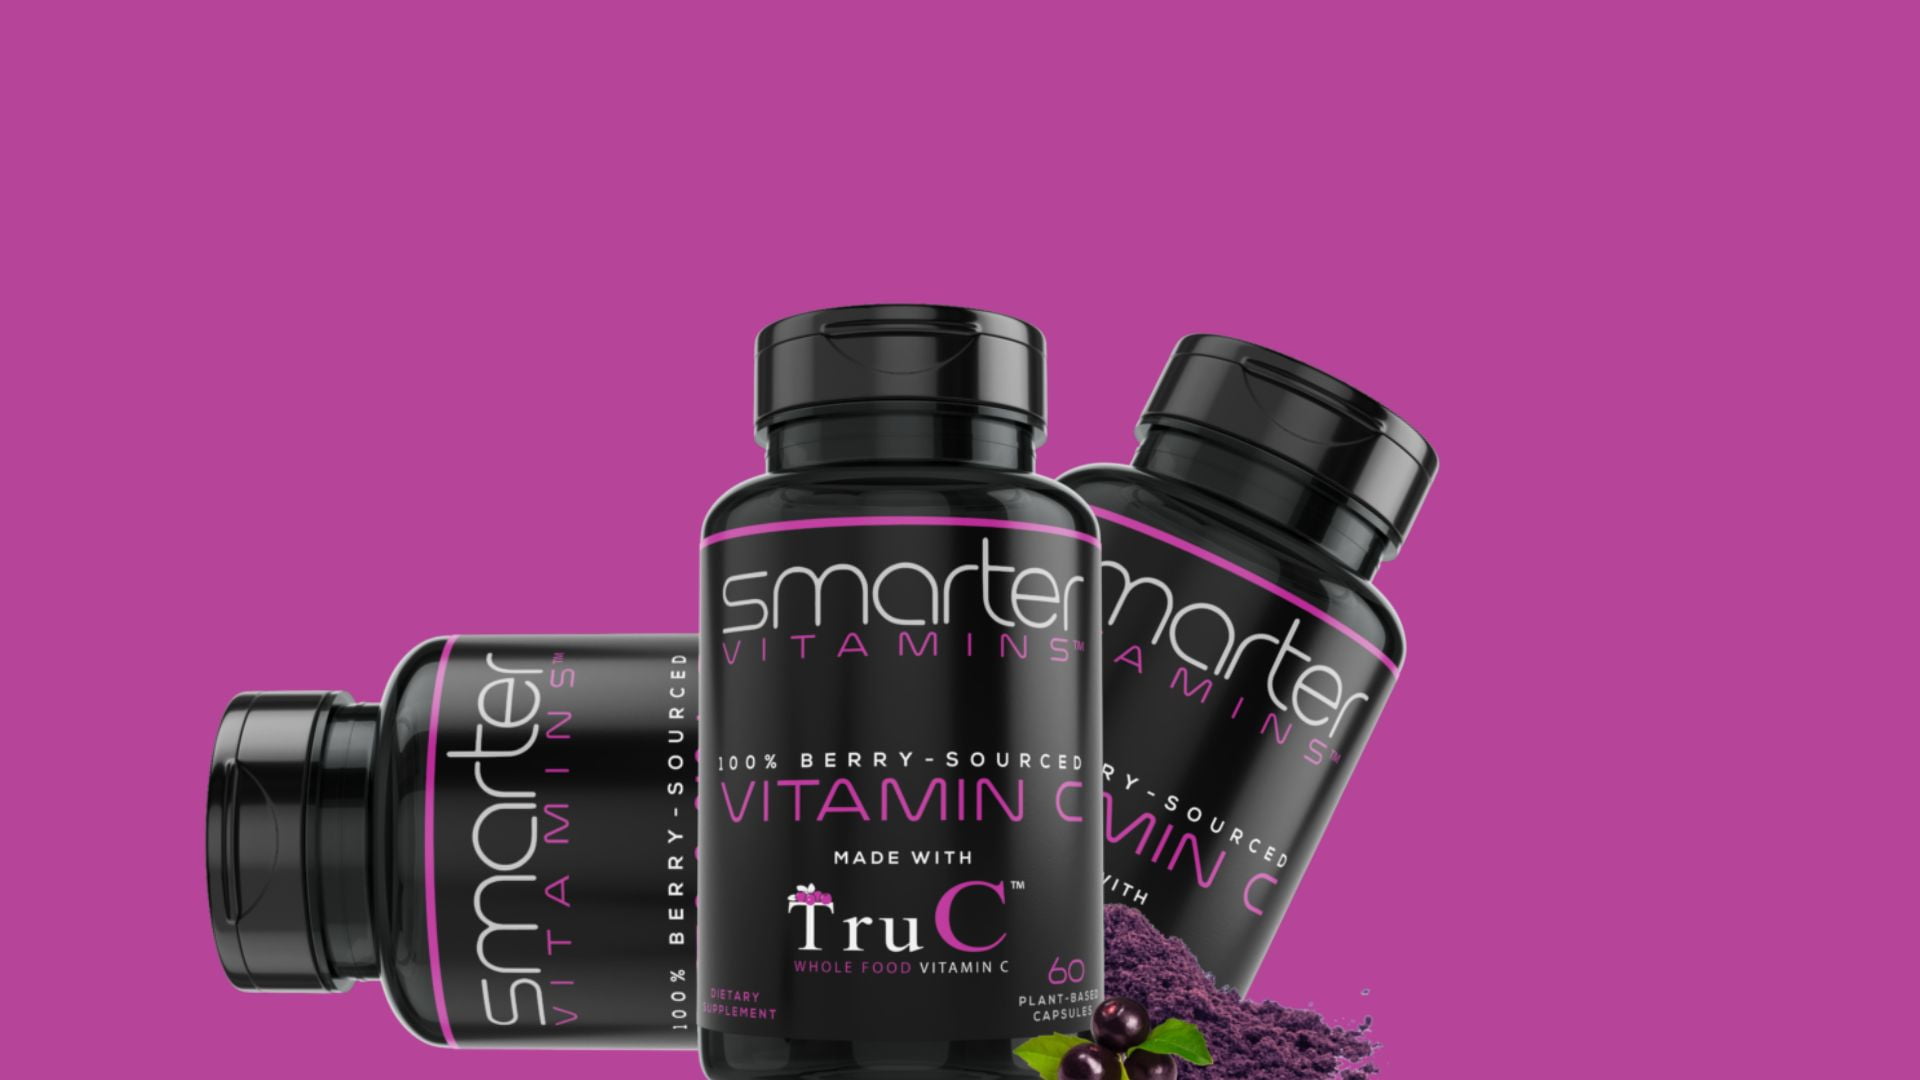 Get the Facts on Your Vitamins with Smarter Vitamins Reviews